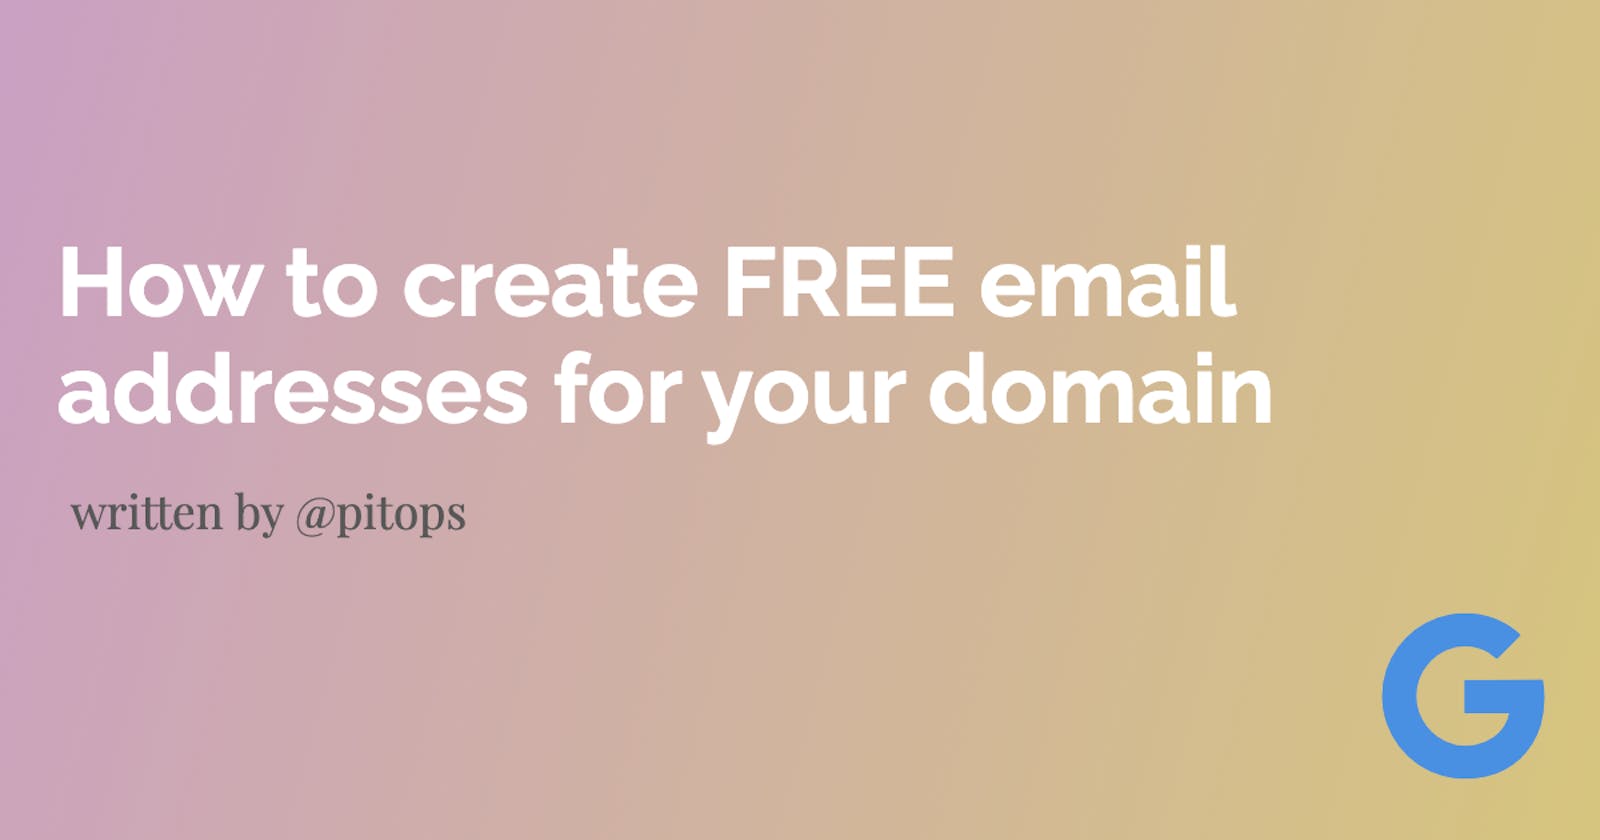 How to create FREE email addresses  for your domain